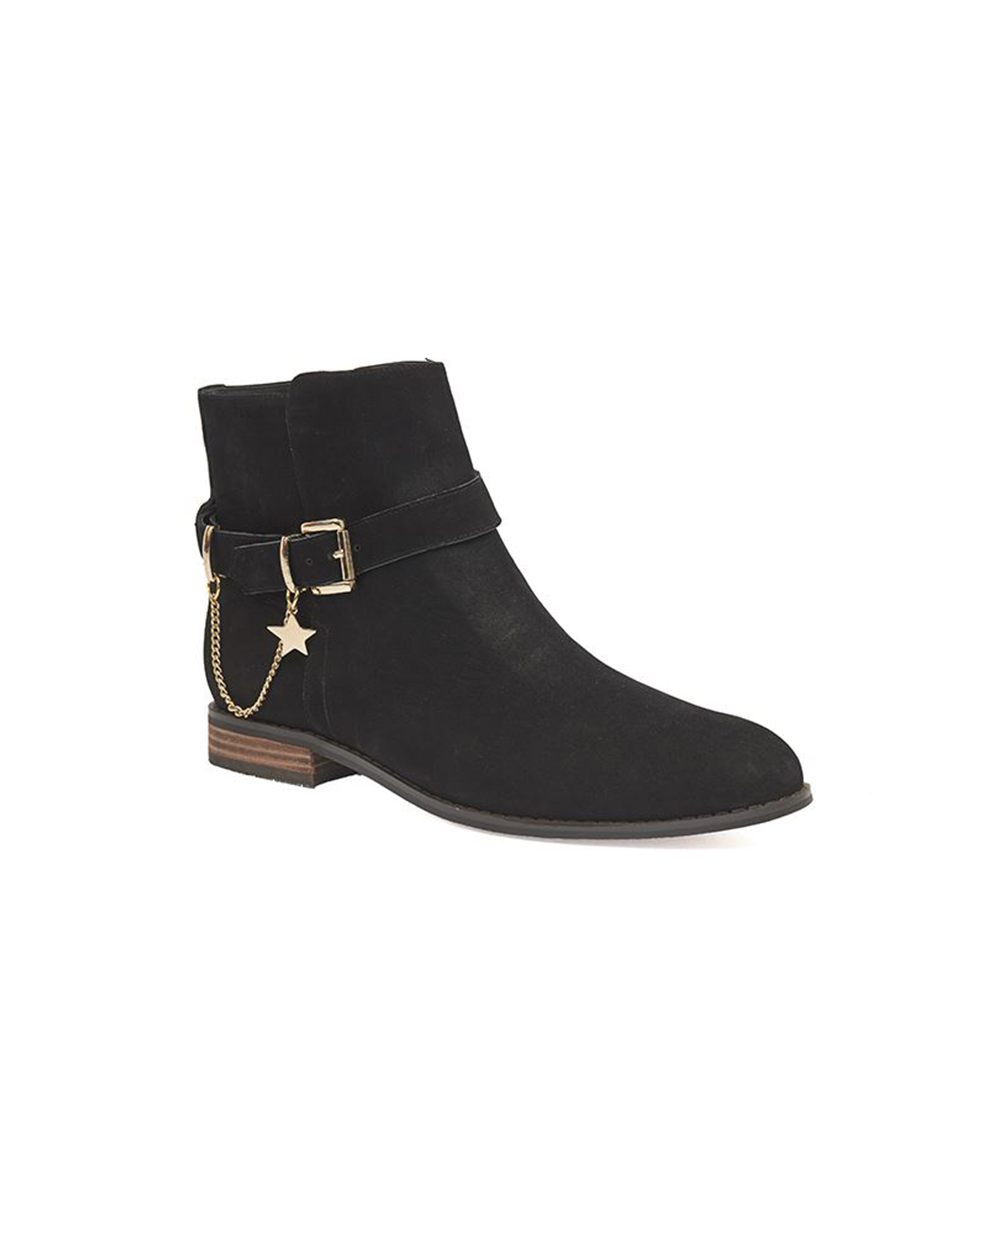 No. 409 FLEMING BOOT, $329, from Kathryn Wilson